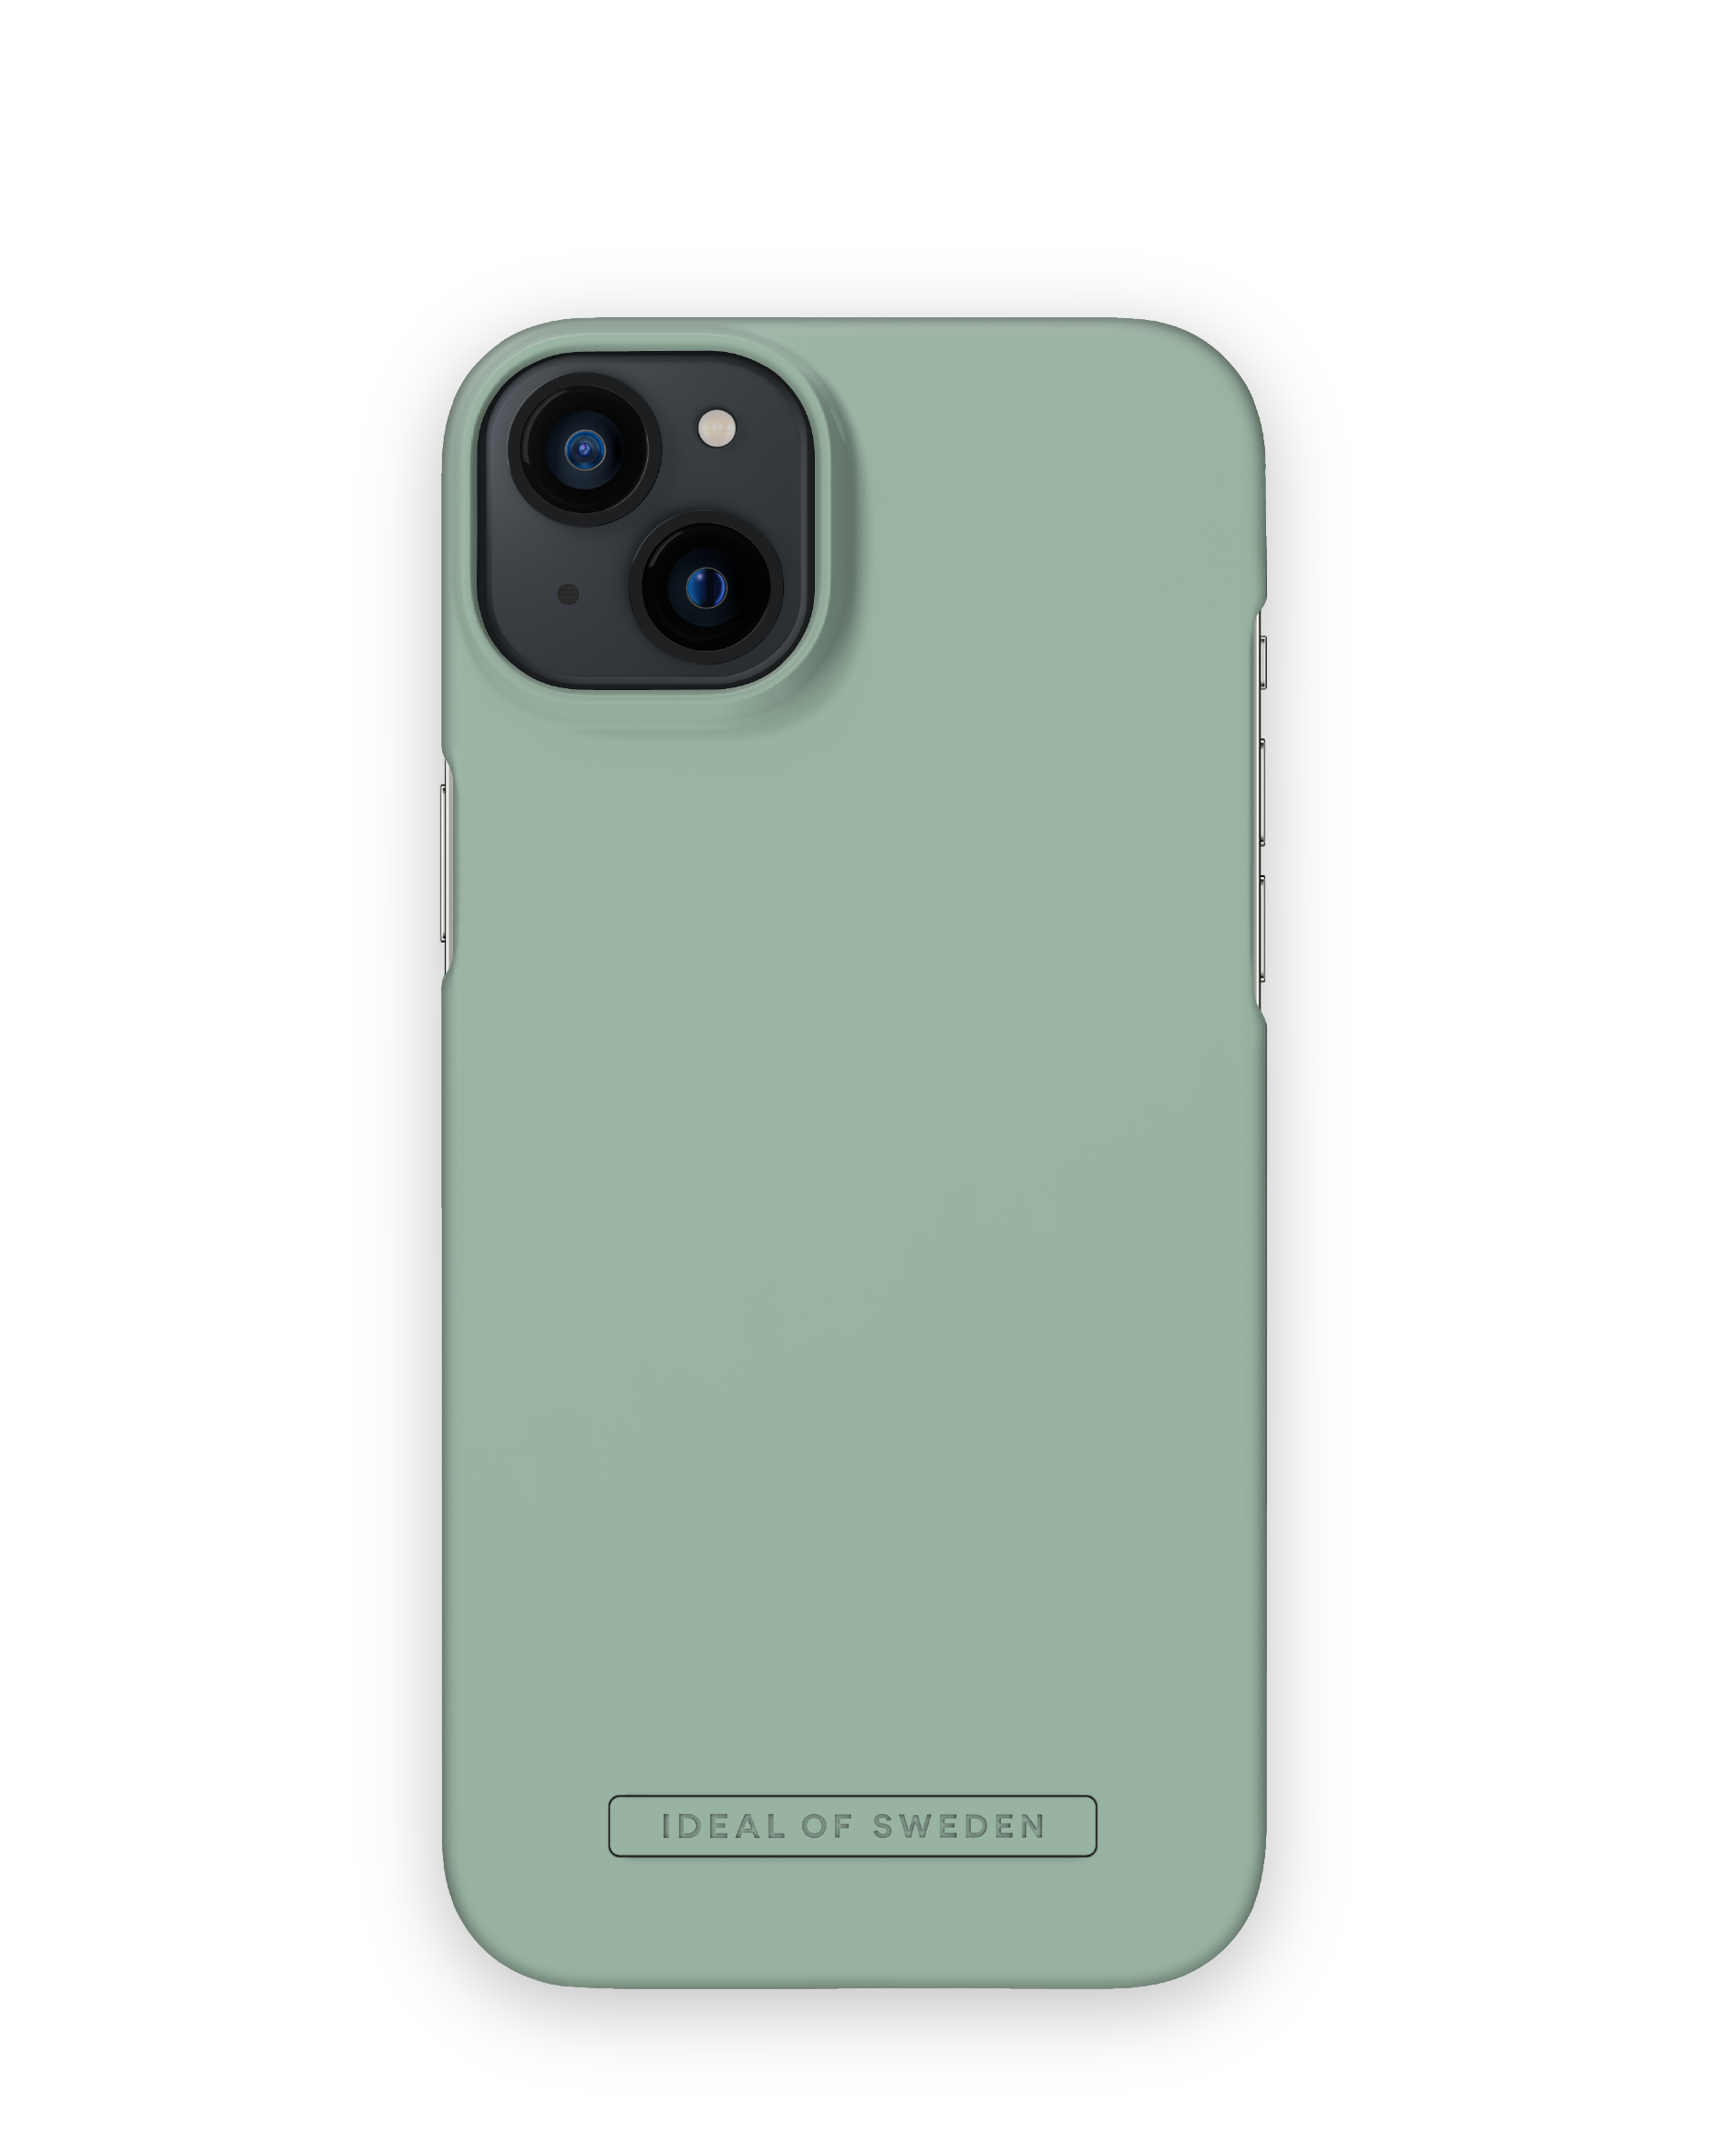 IDEAL OF iPhone IDFCSS22-I2267-419, Sage Plus, SWEDEN Apple, Backcover, 14 Green